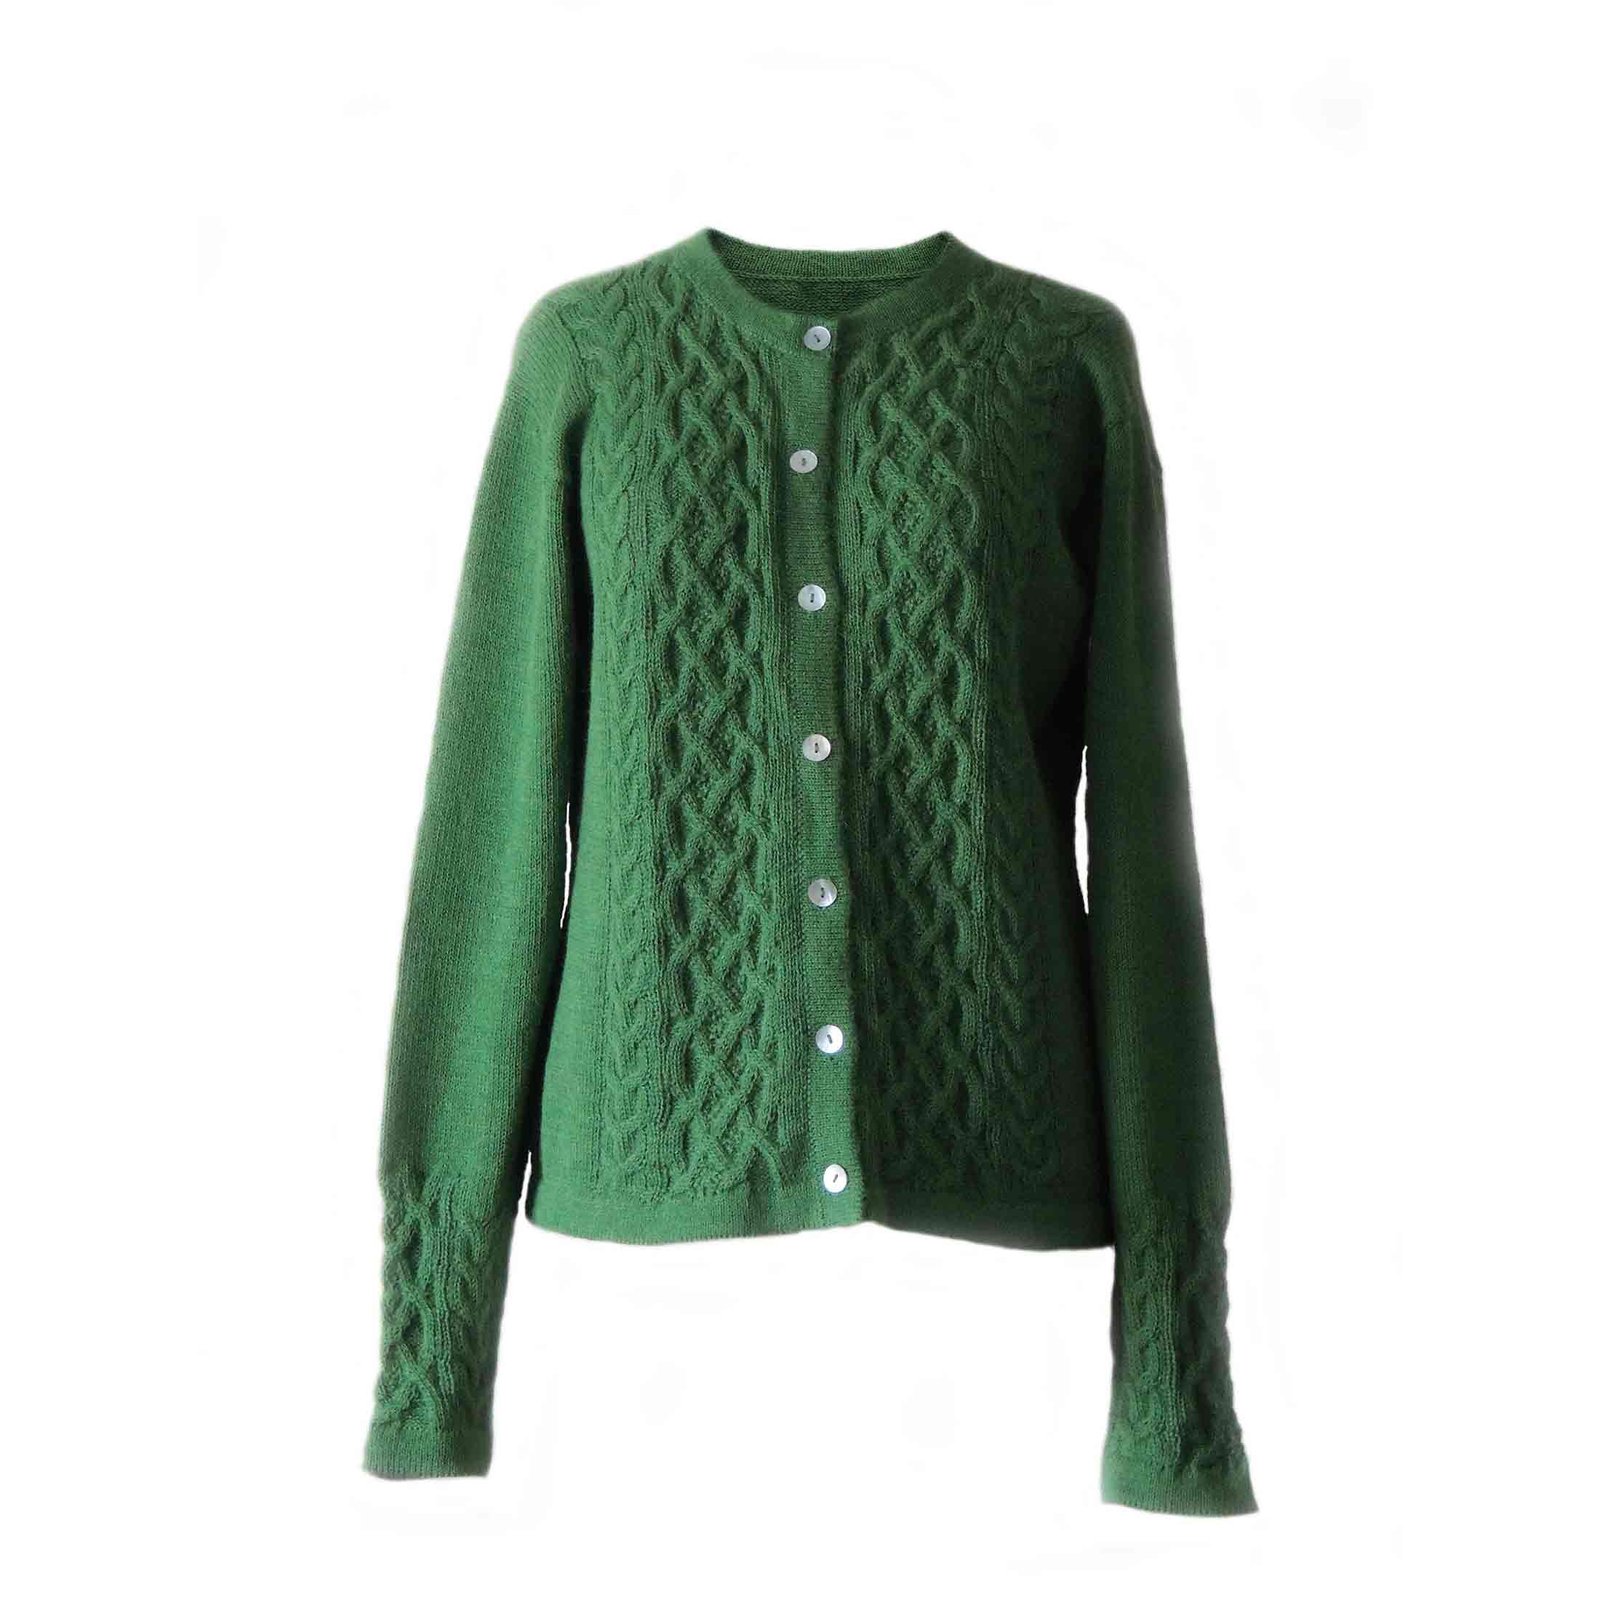 PFL knitwear cardigan with crewneck, cable pattern baby alapca